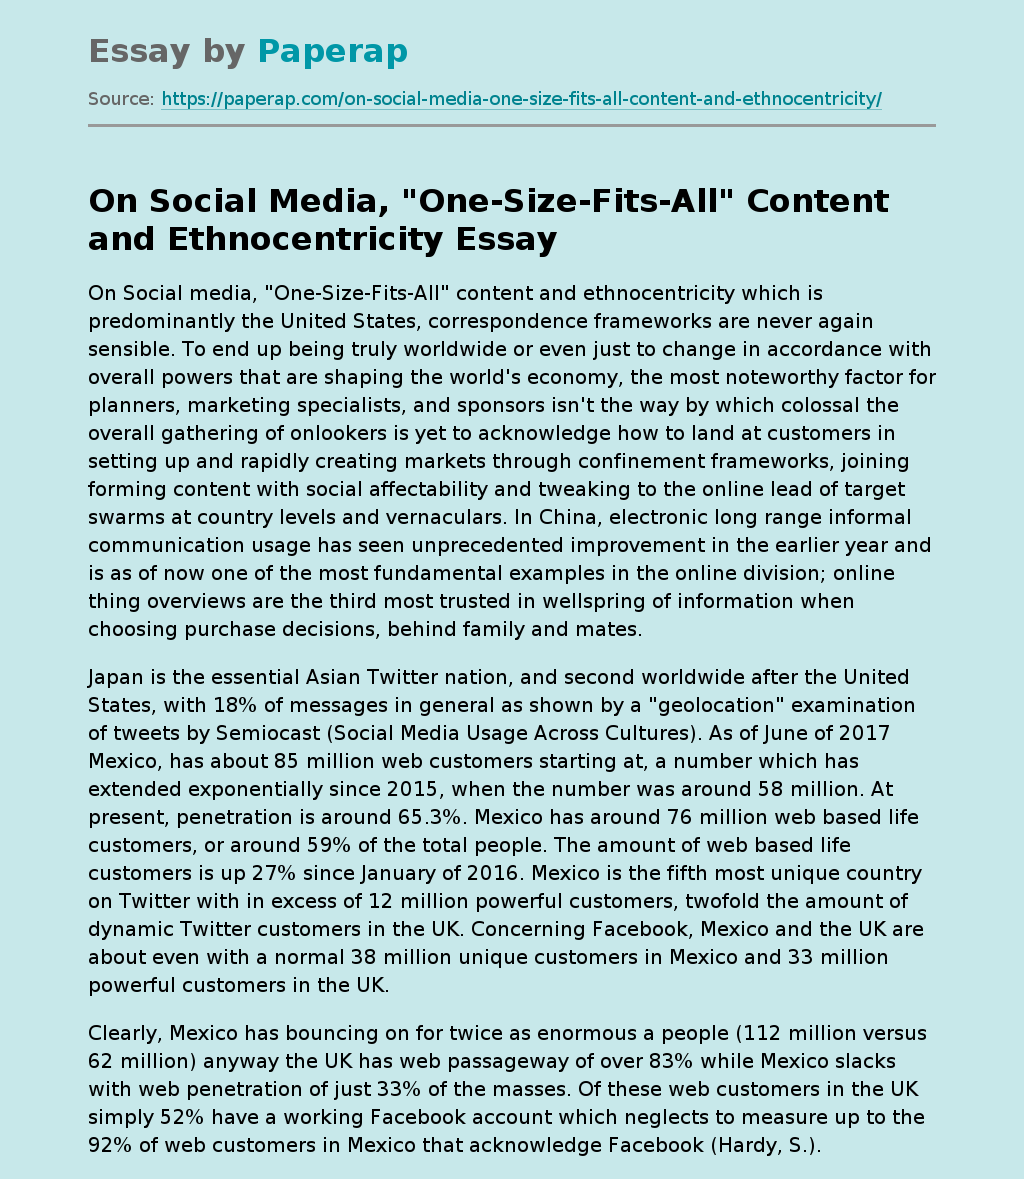 On Social Media, "One-Size-Fits-All" Content and Ethnocentricity